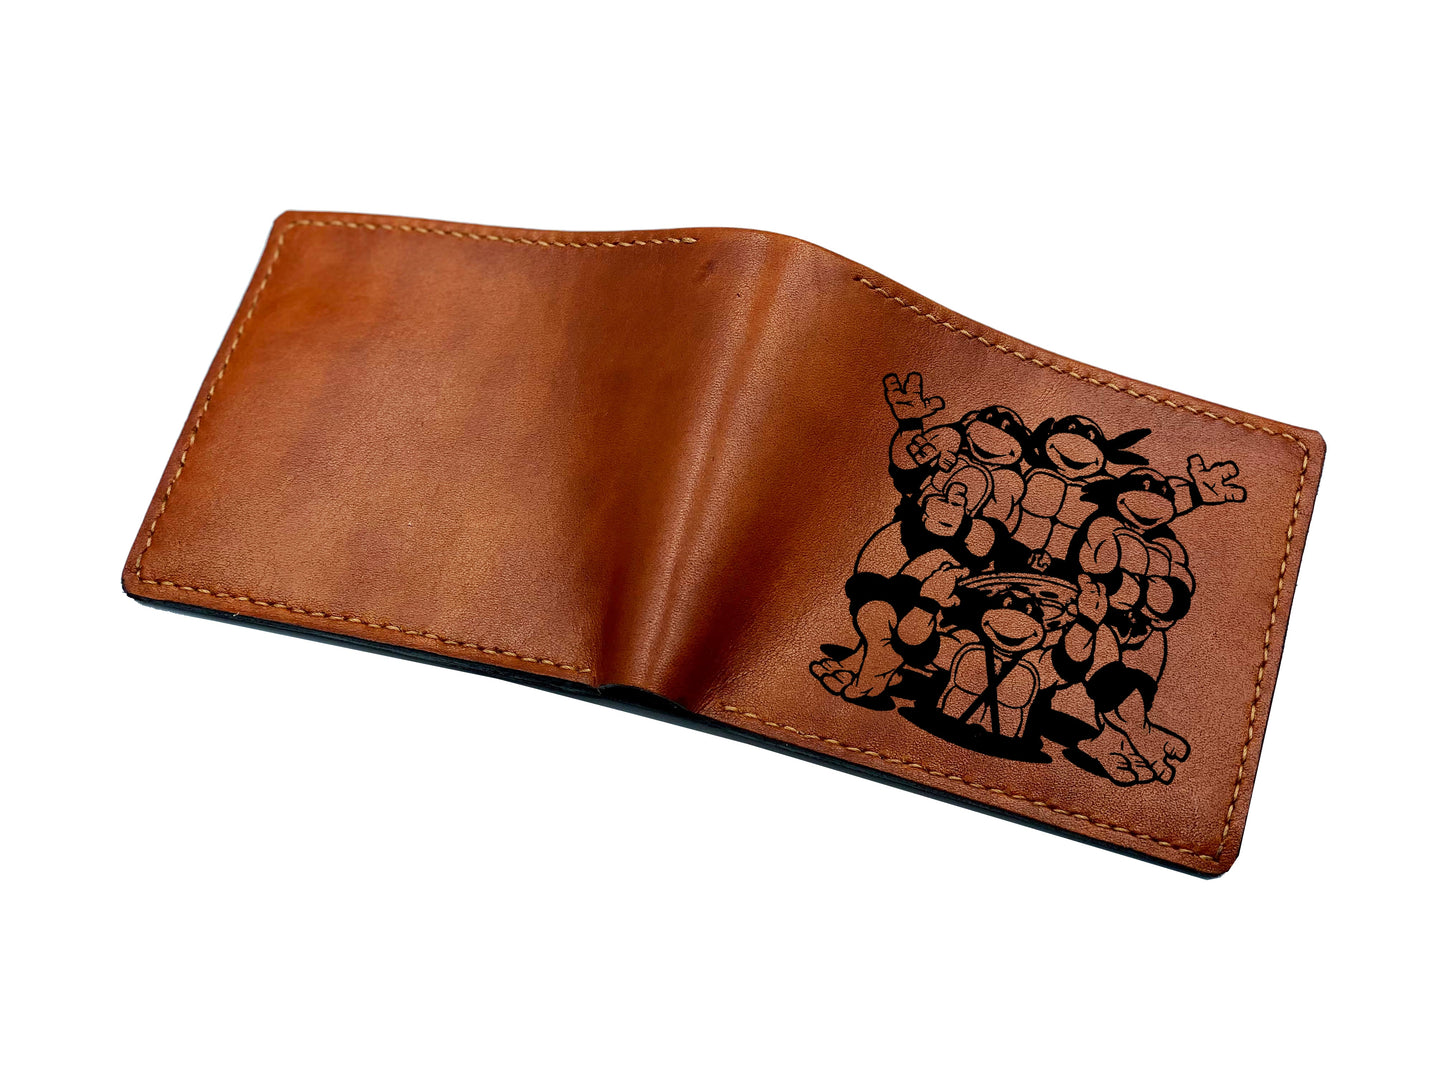 Mayan Corner - Personalized genuine leather handmade wallet, leather gift ideas for him, ninja turtle leather art wallet - 0111222